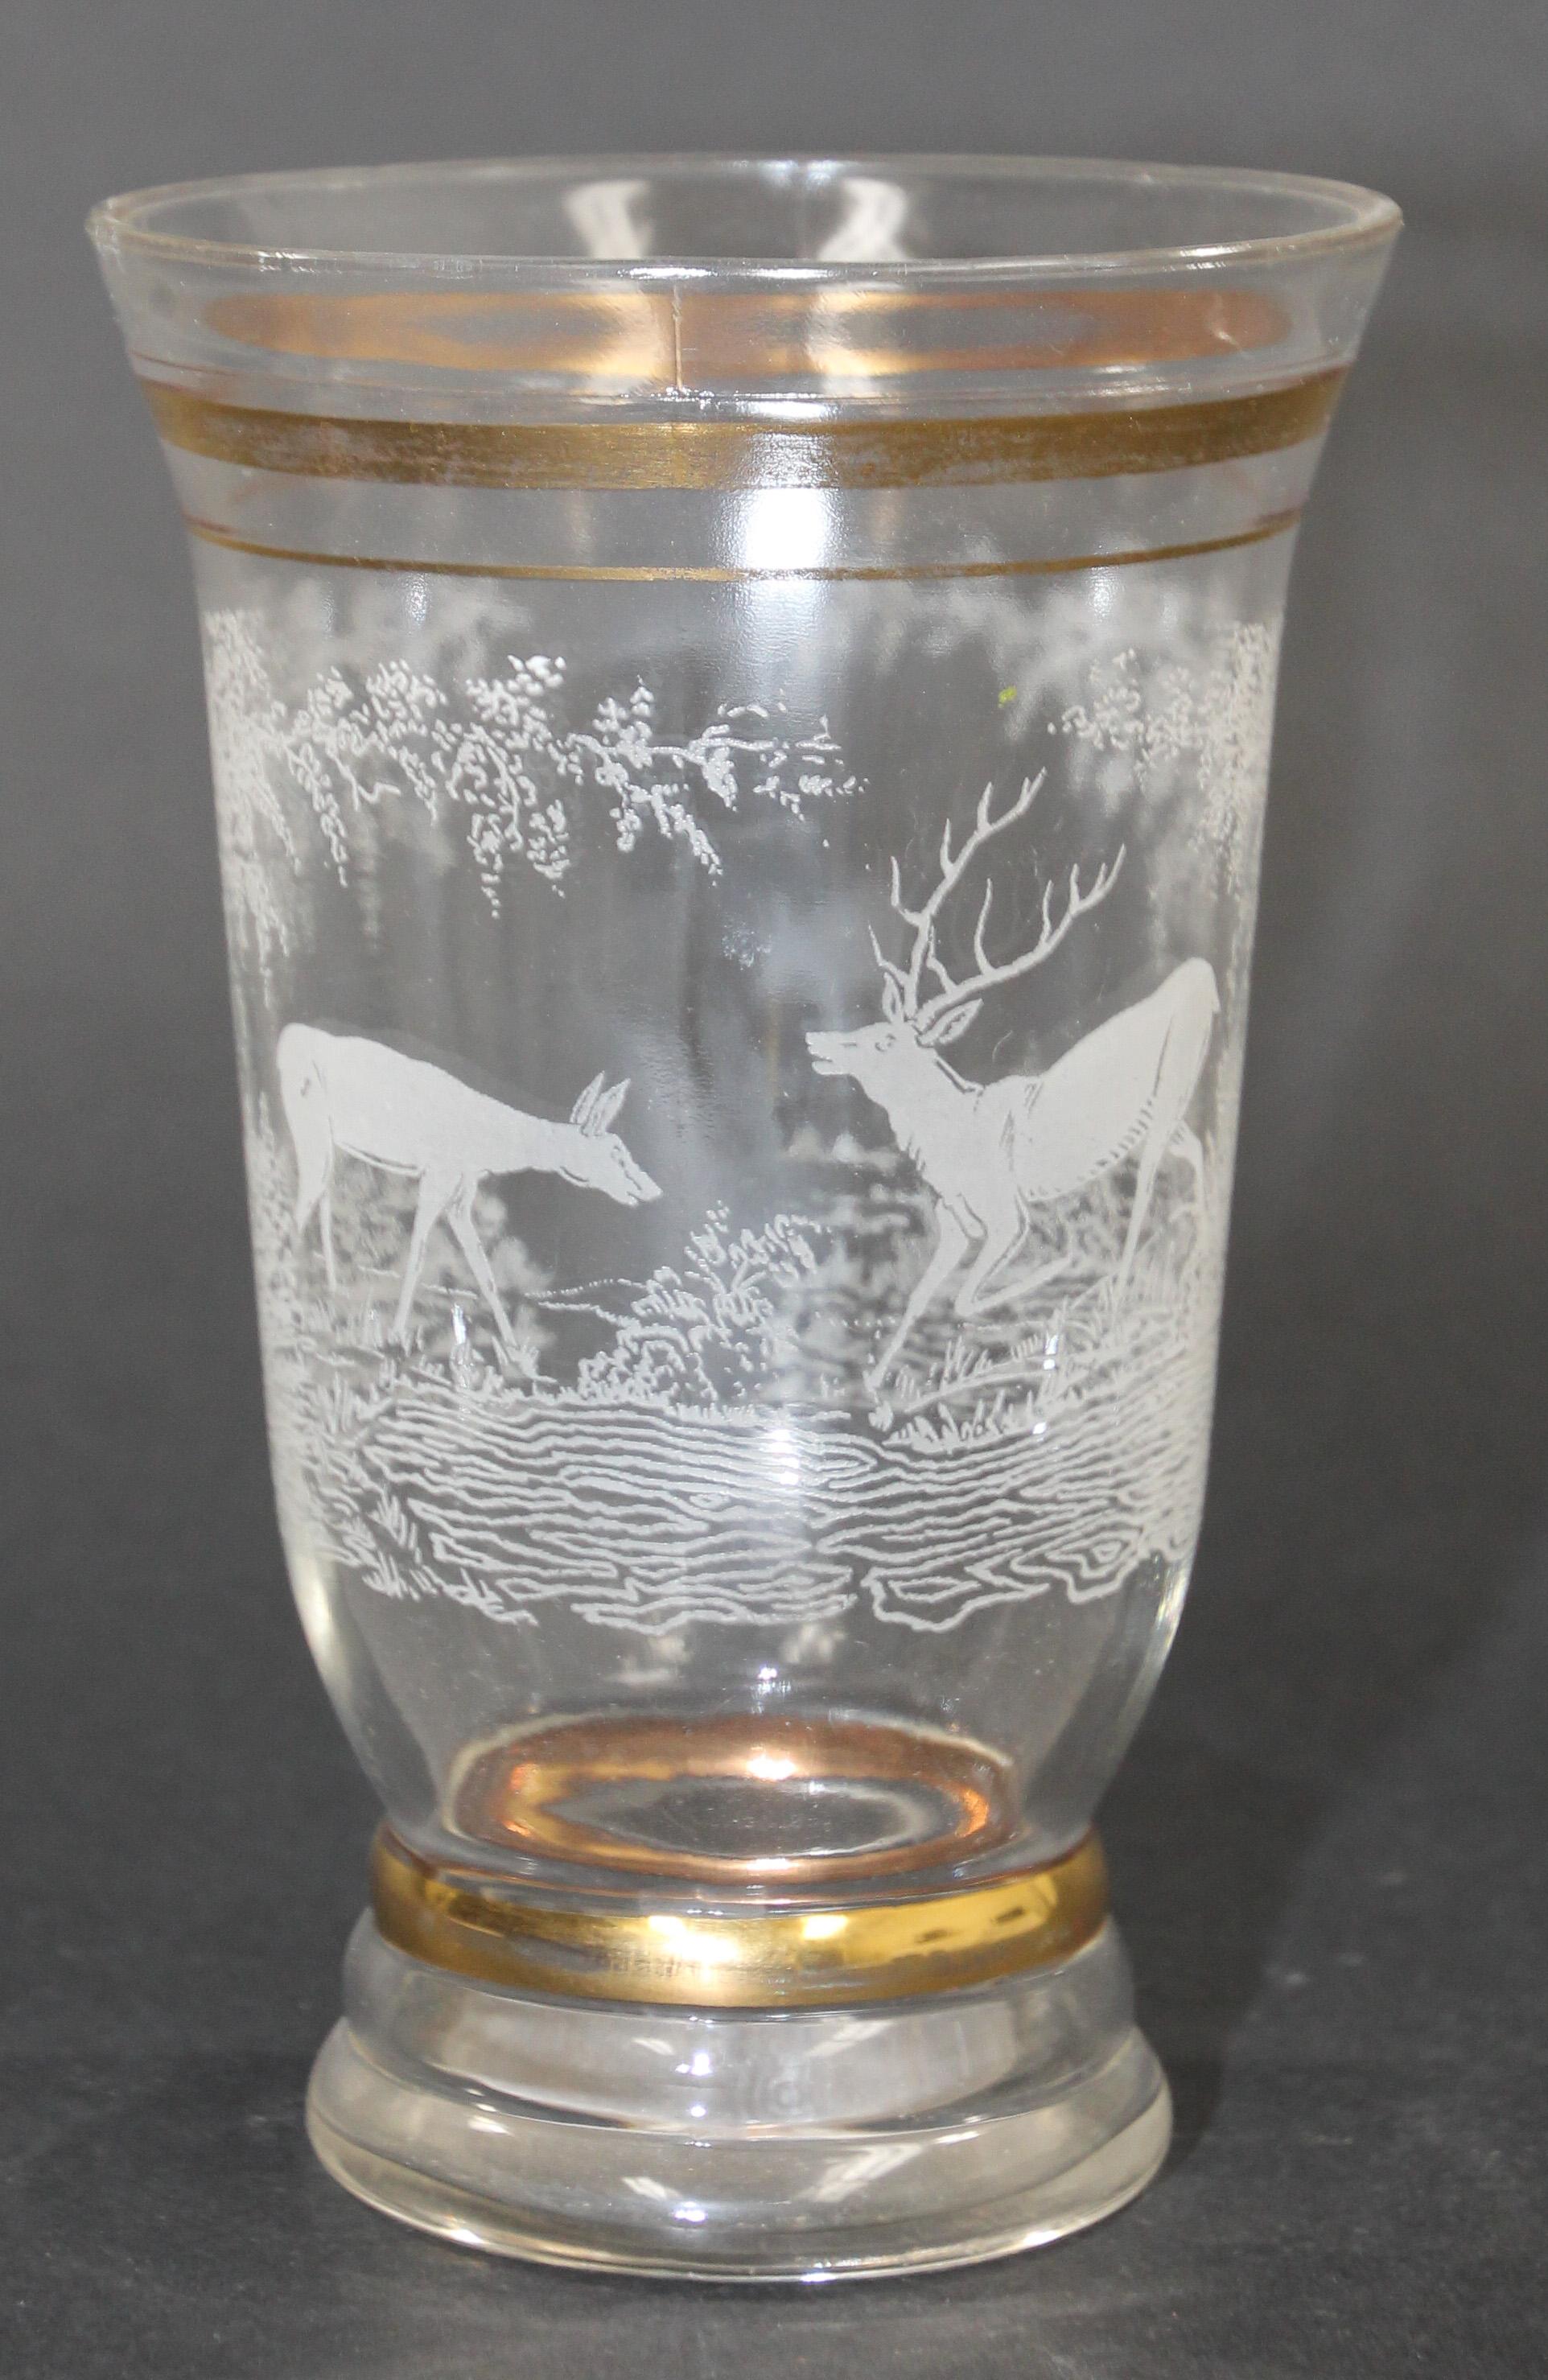 French antique vase art deco glass vase with frosted white design deer and antelope scenery in the woods.
Elegant vase with acid etched and gilded design of deer and stag in the wilderness  with ornamental gilded lines.
Circa 1930s Art Deco in the